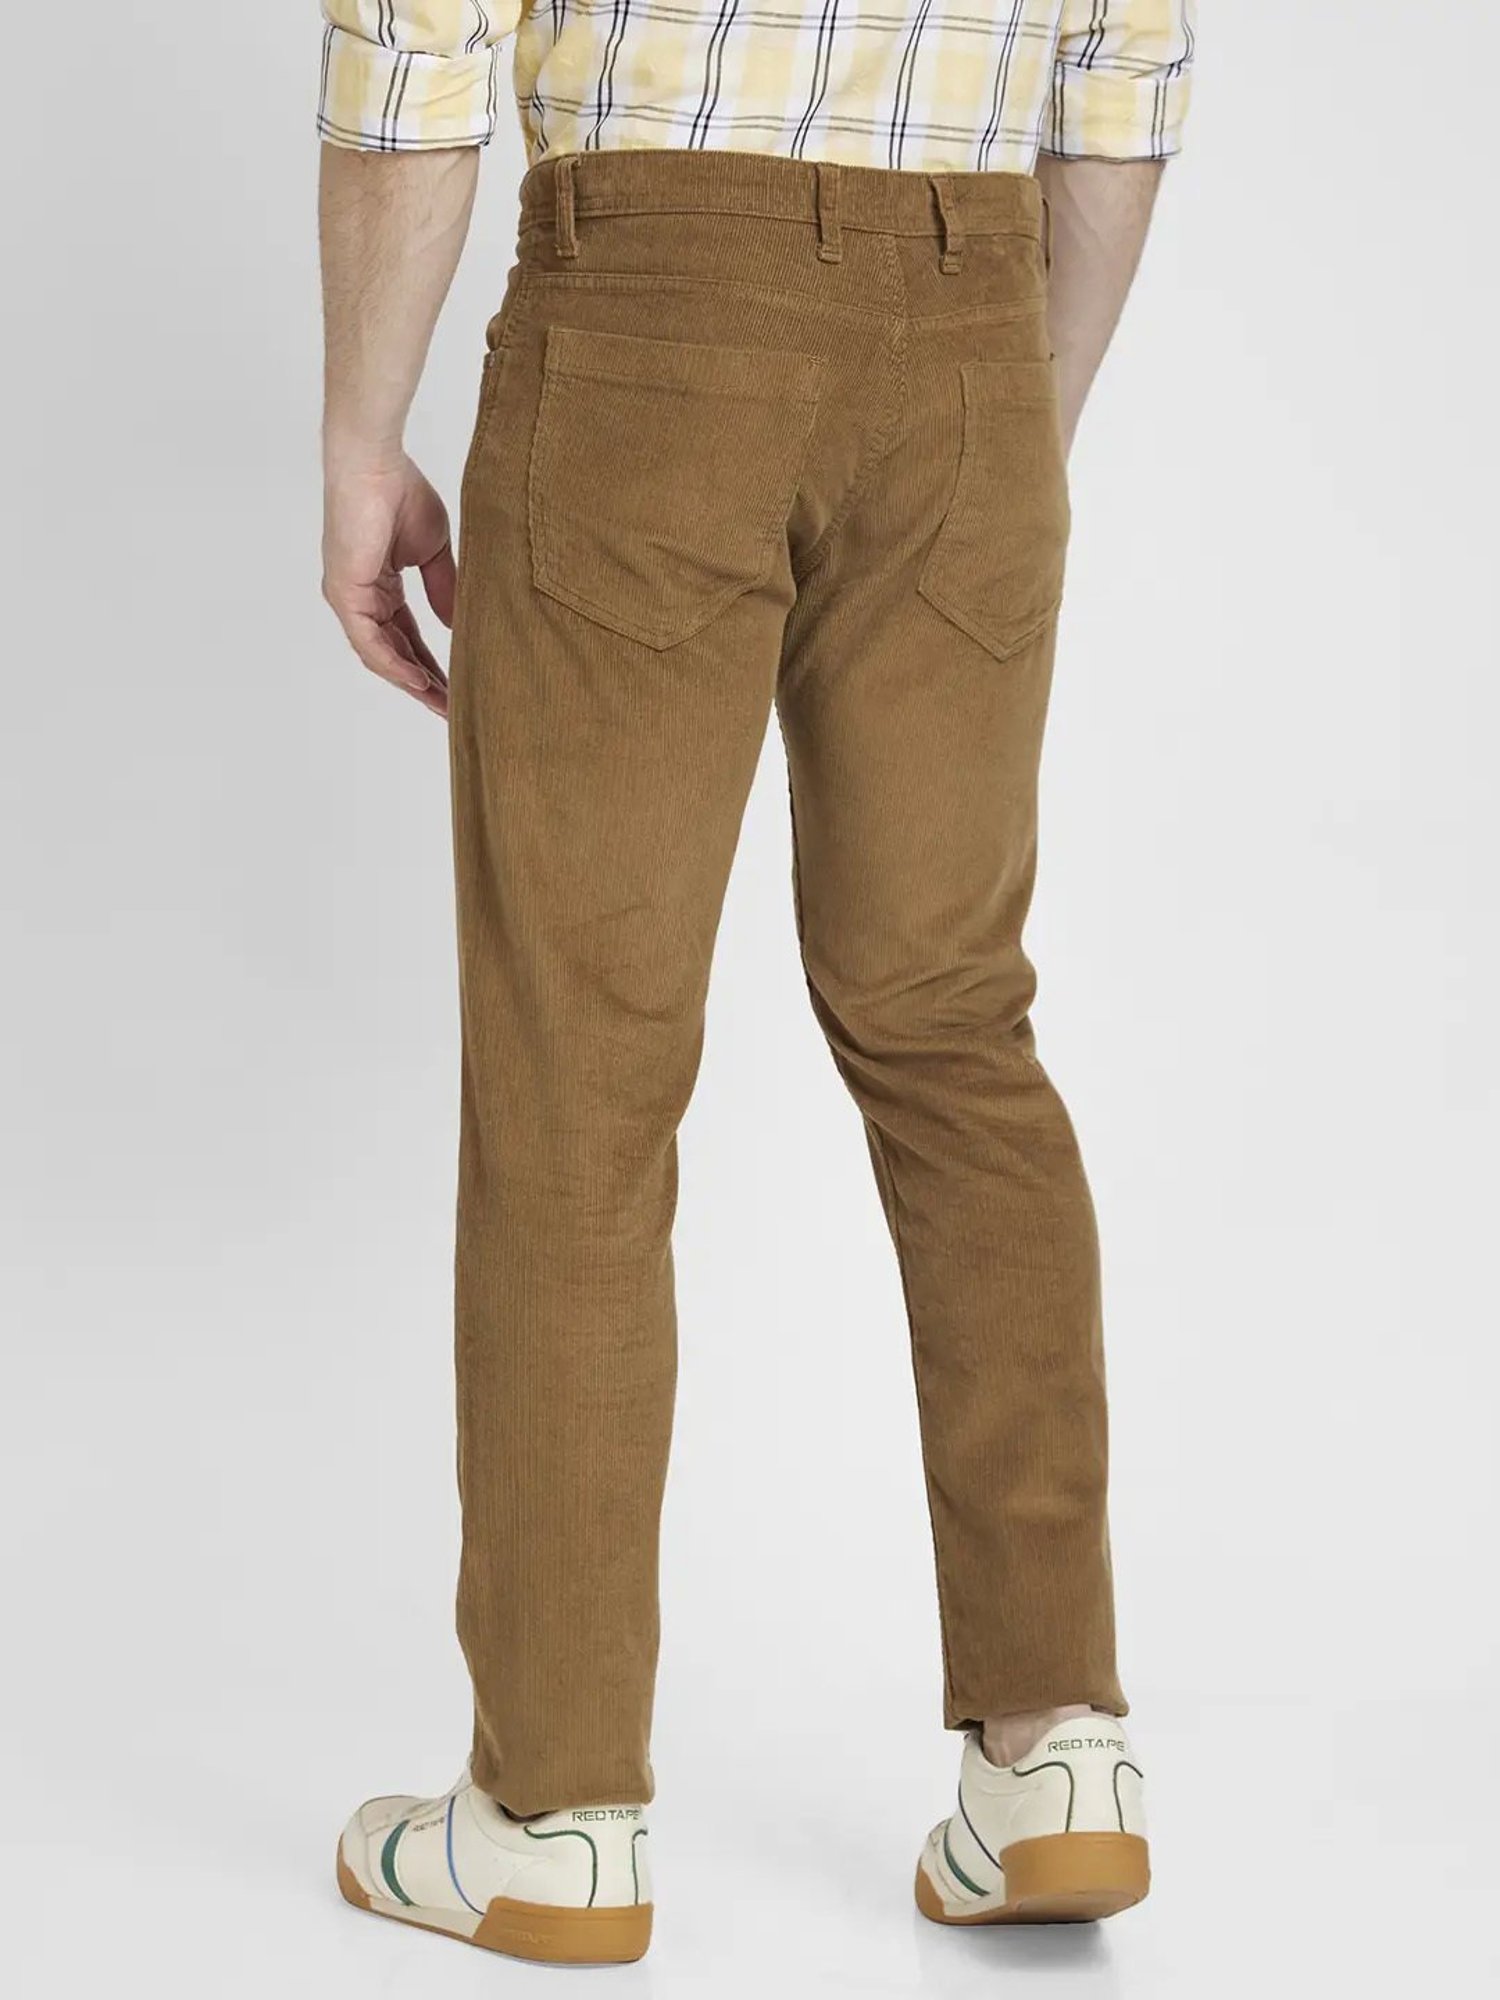 Red Tape Men's Beige Solid Washed Cotton Spandex Skinny Jeans_RDM0087A-30 :  Amazon.in: Clothing & Accessories